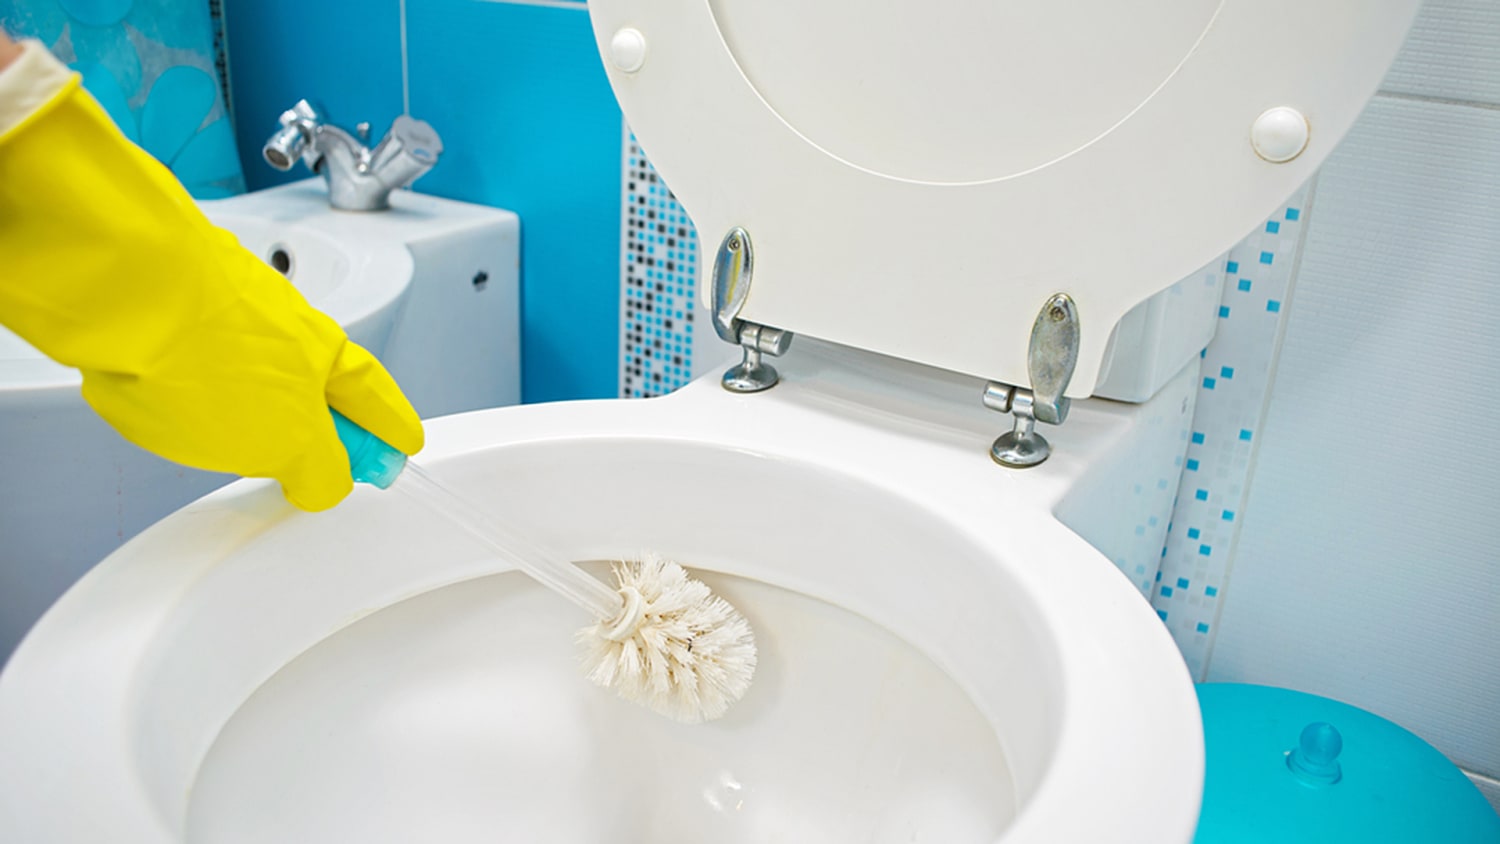 How to clean a toilet bowl